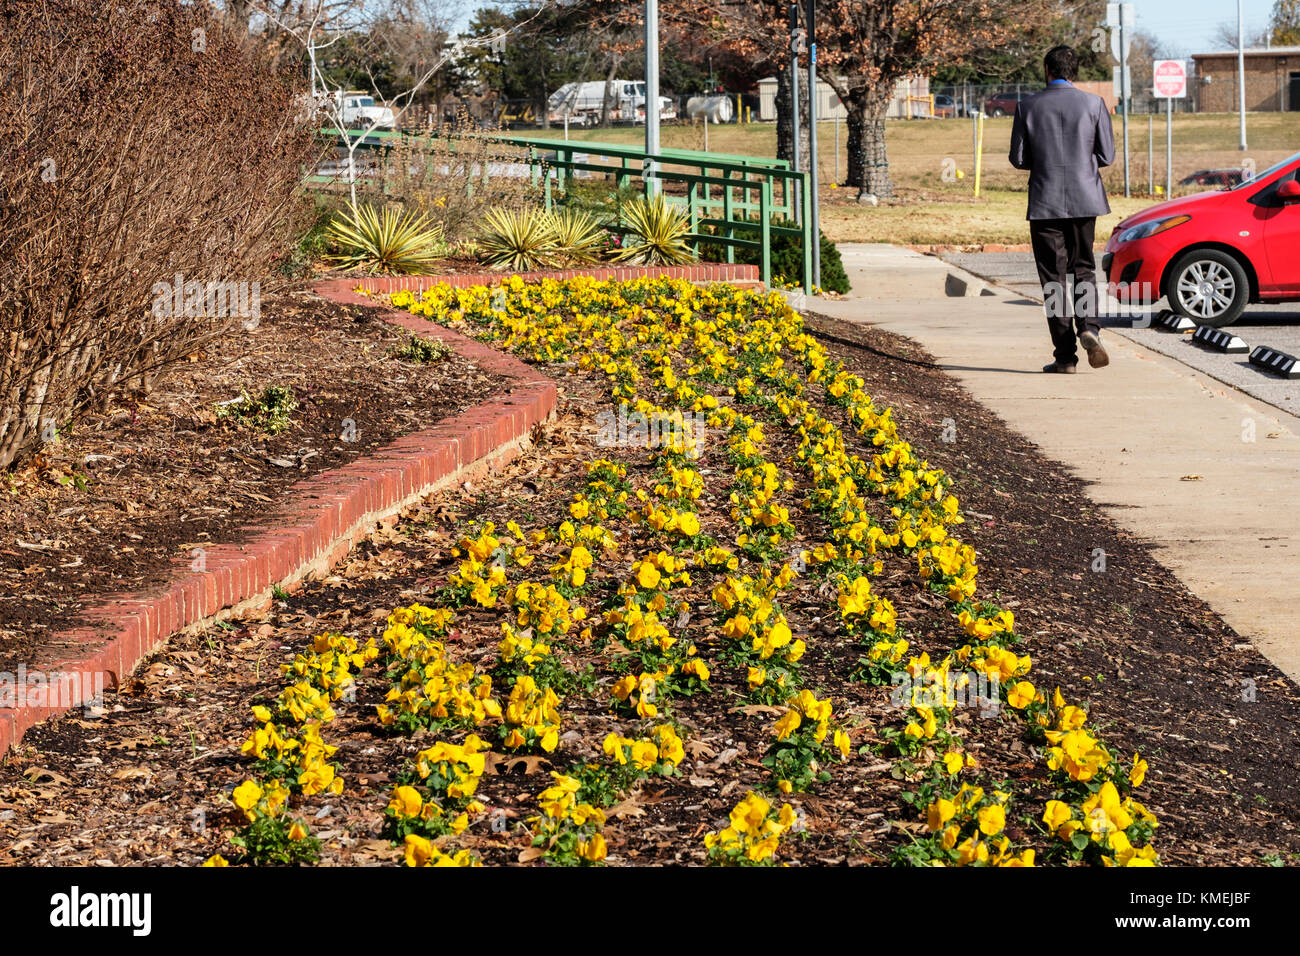 A garden bed rows of yellow pansies planted for winter color in Will Rogers botanical garden, Oklahoma City, Oklahoma, USA. Stock Photo